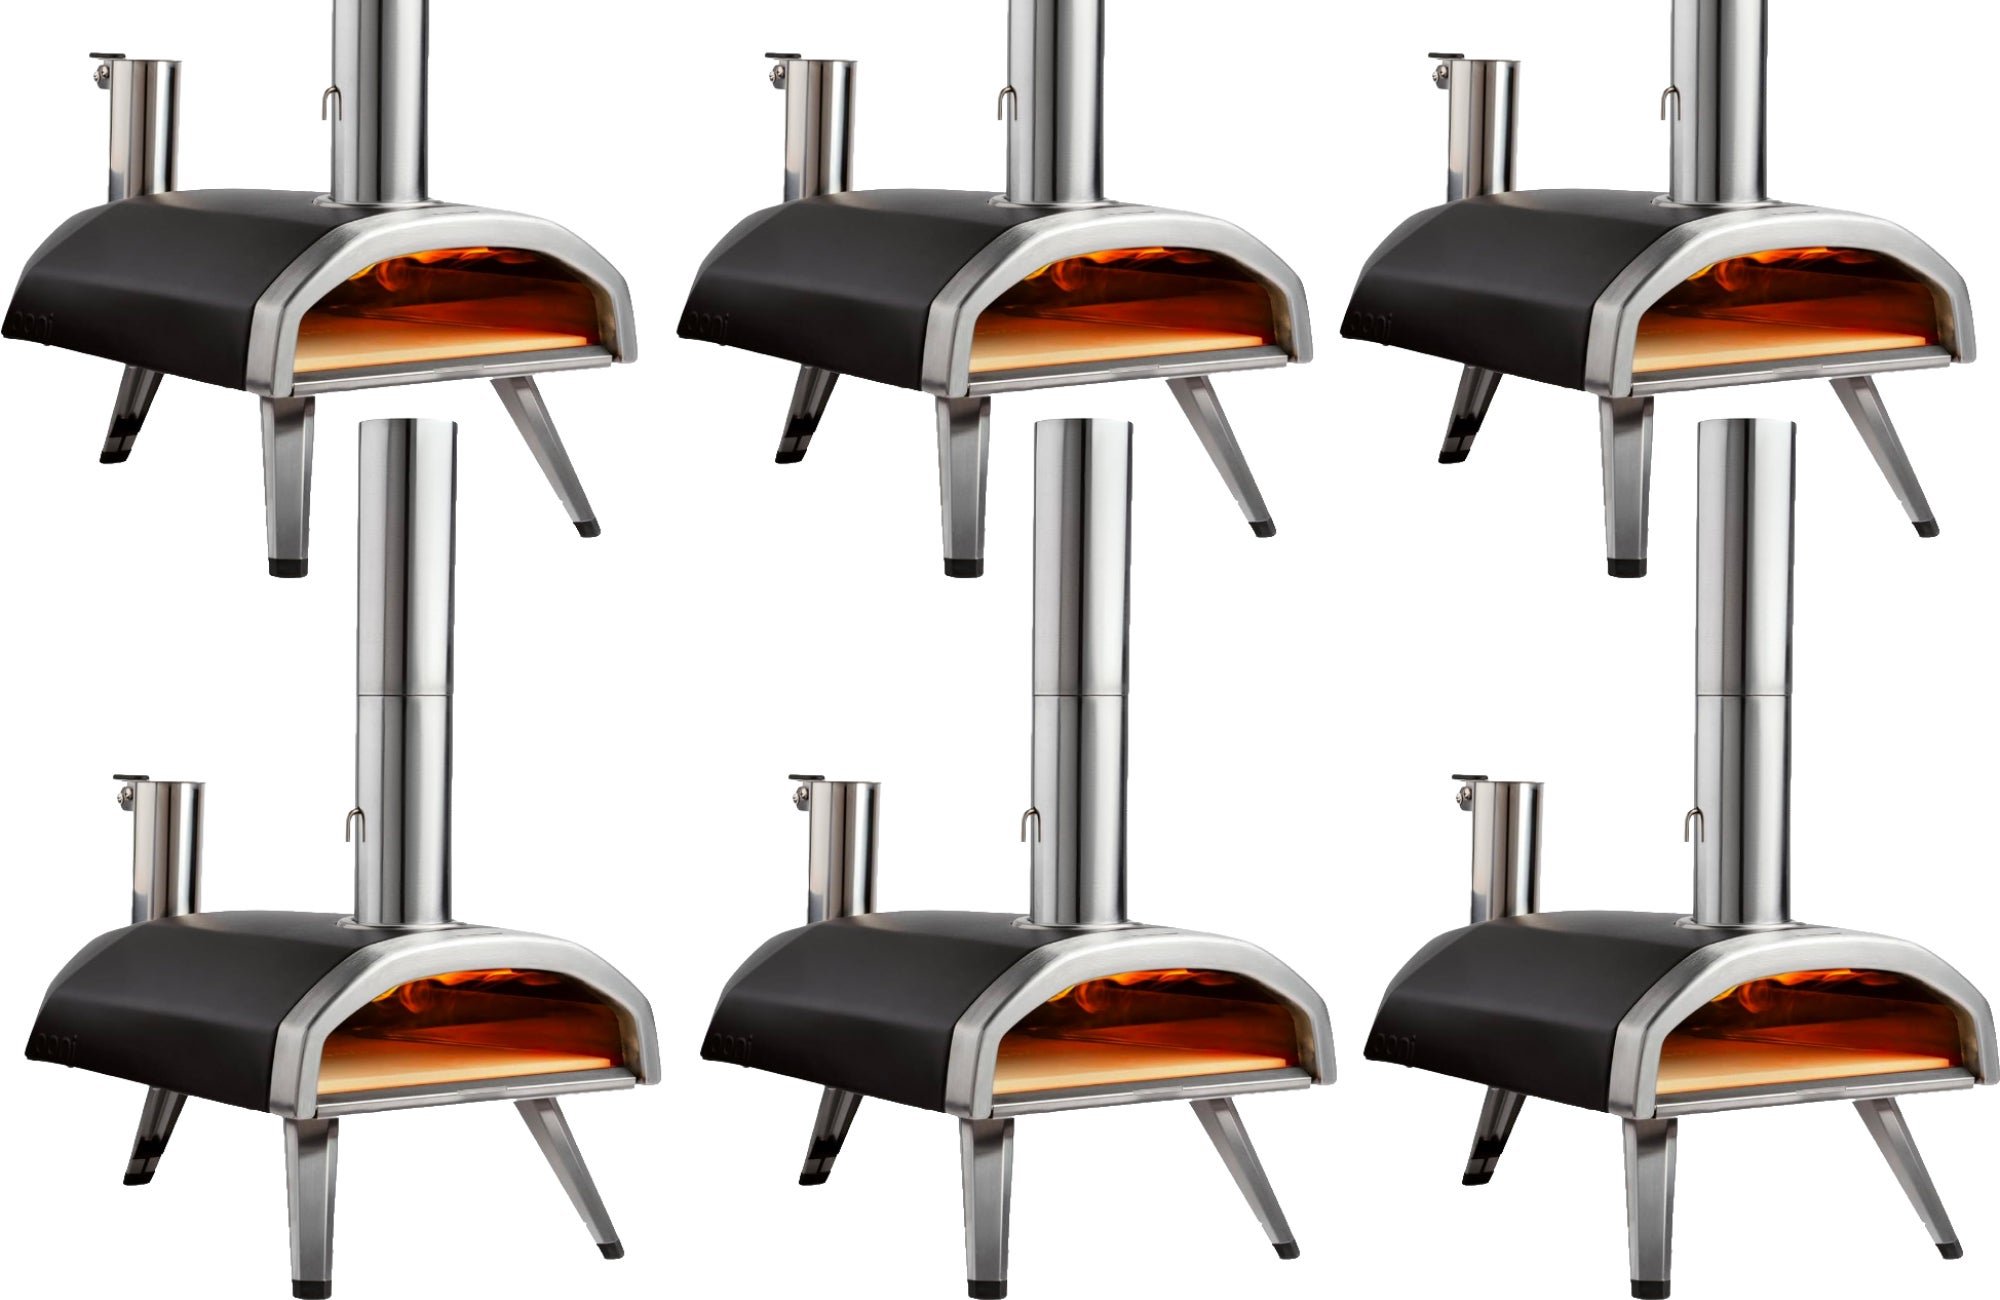 Ooni’s pizza oven is down to its lowest price ever on Amazon for Cyber Monday